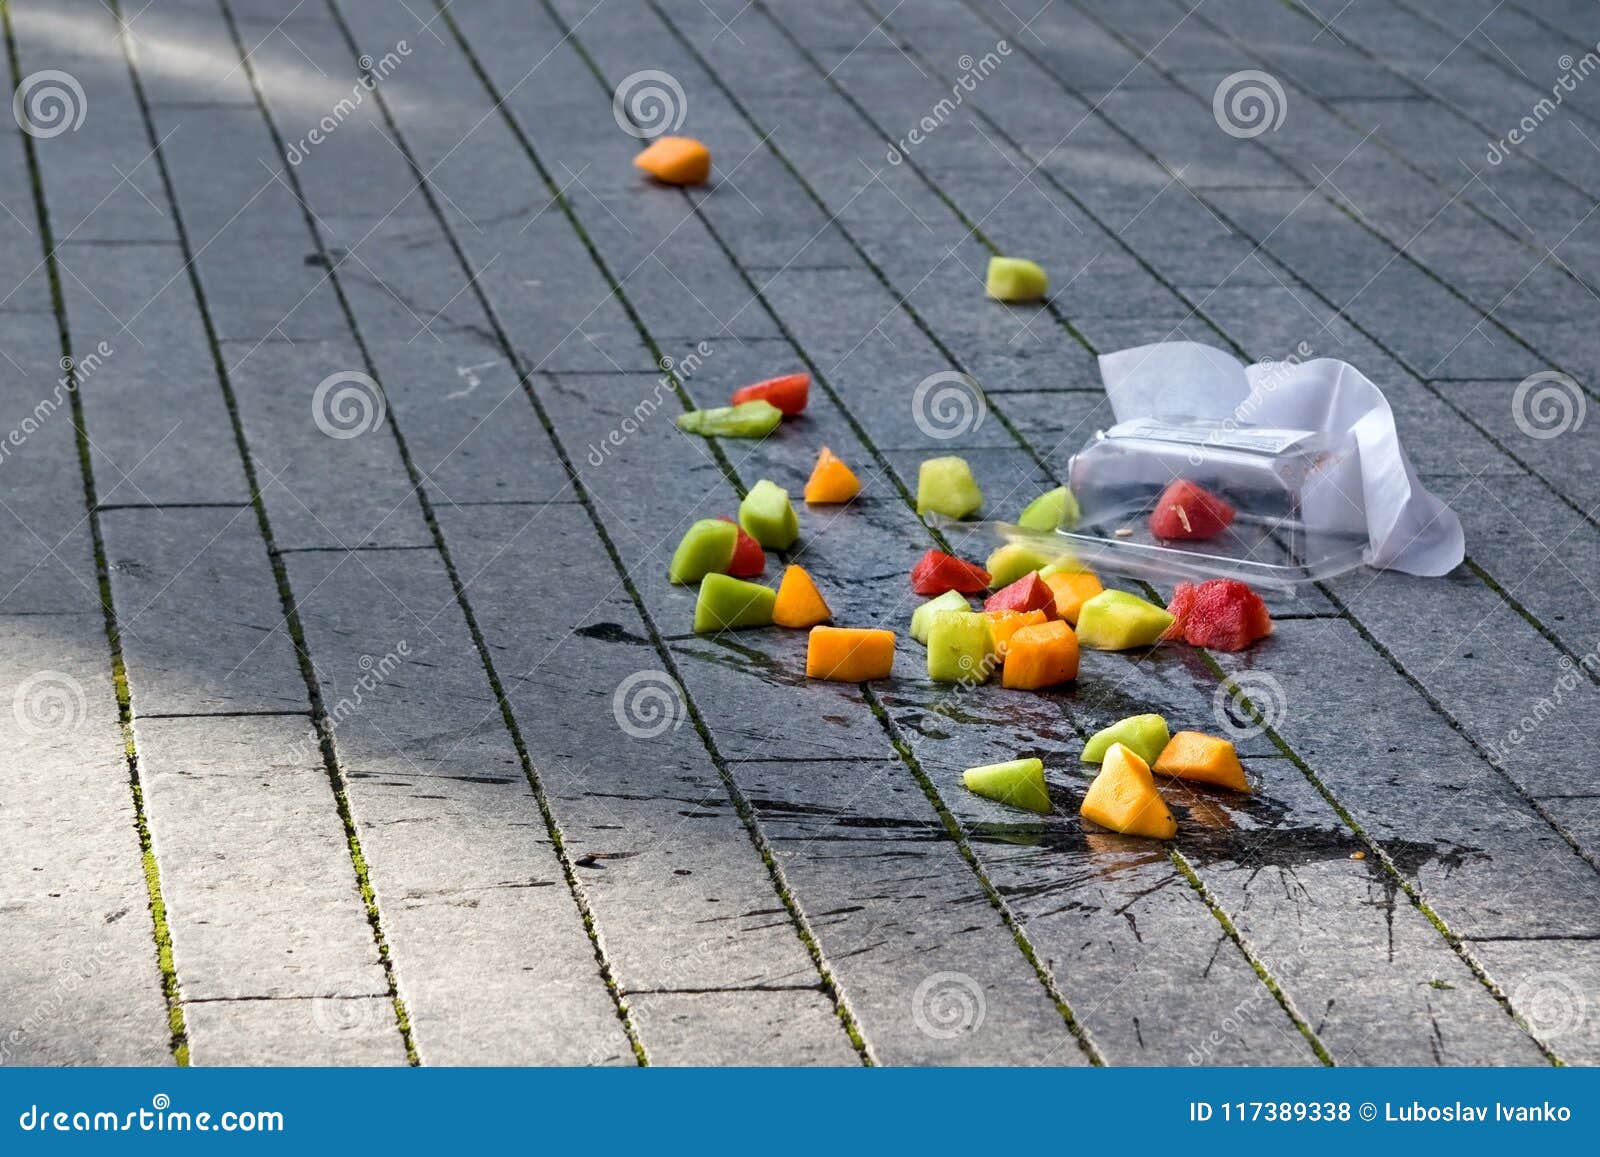 fruit salad accidentally dropped to ground. misfortune concept